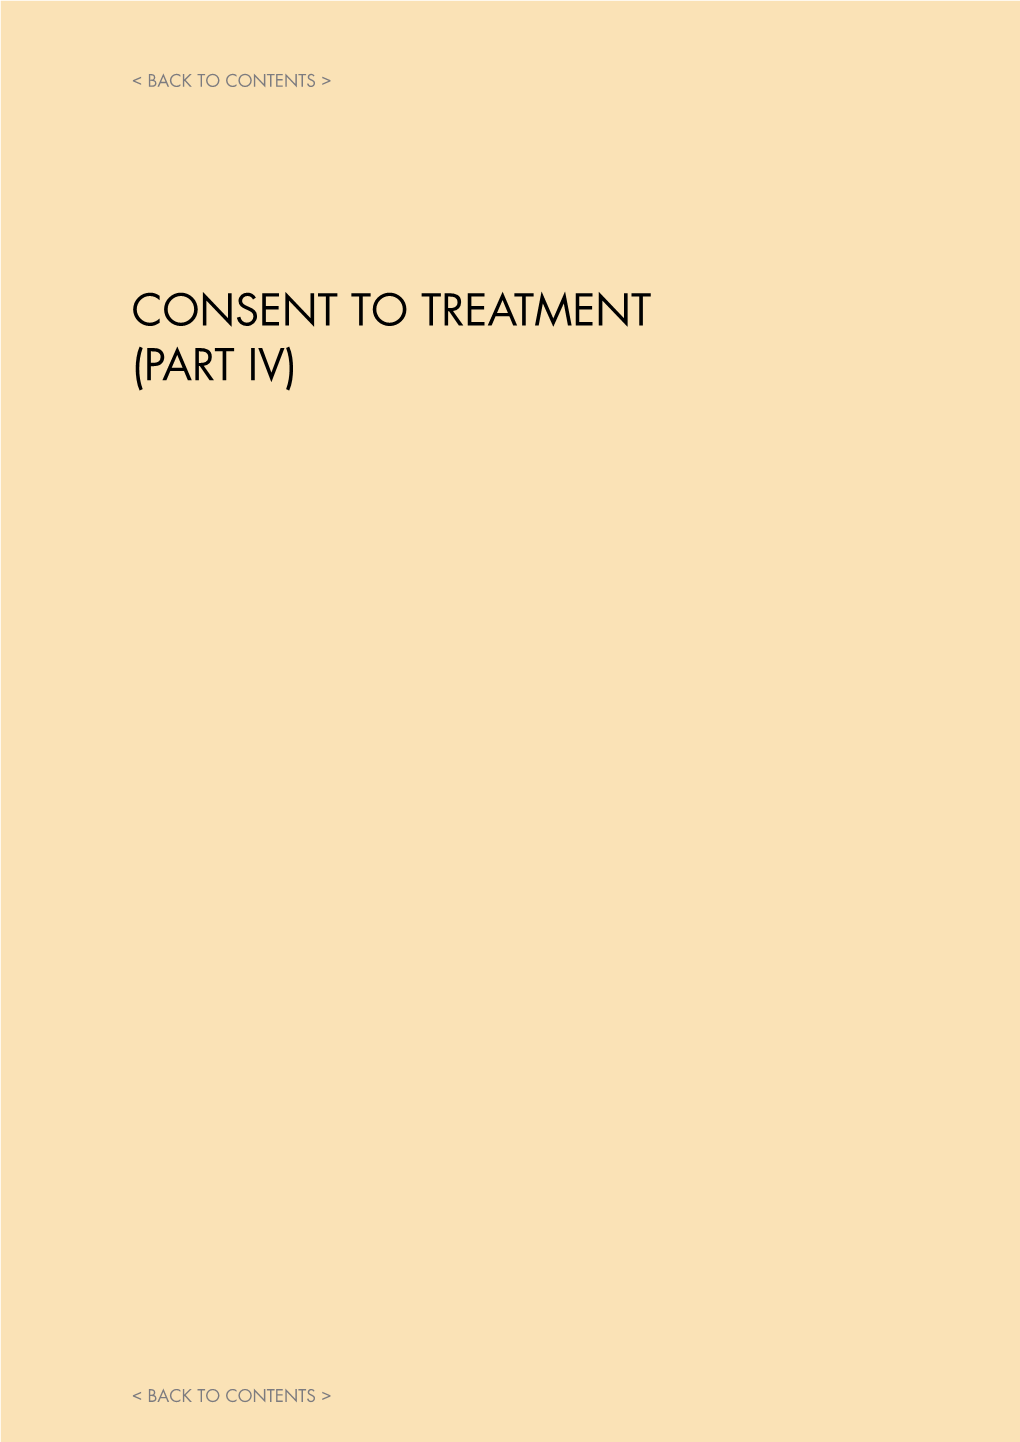 CONSENT to TREATMENT (Part IV)